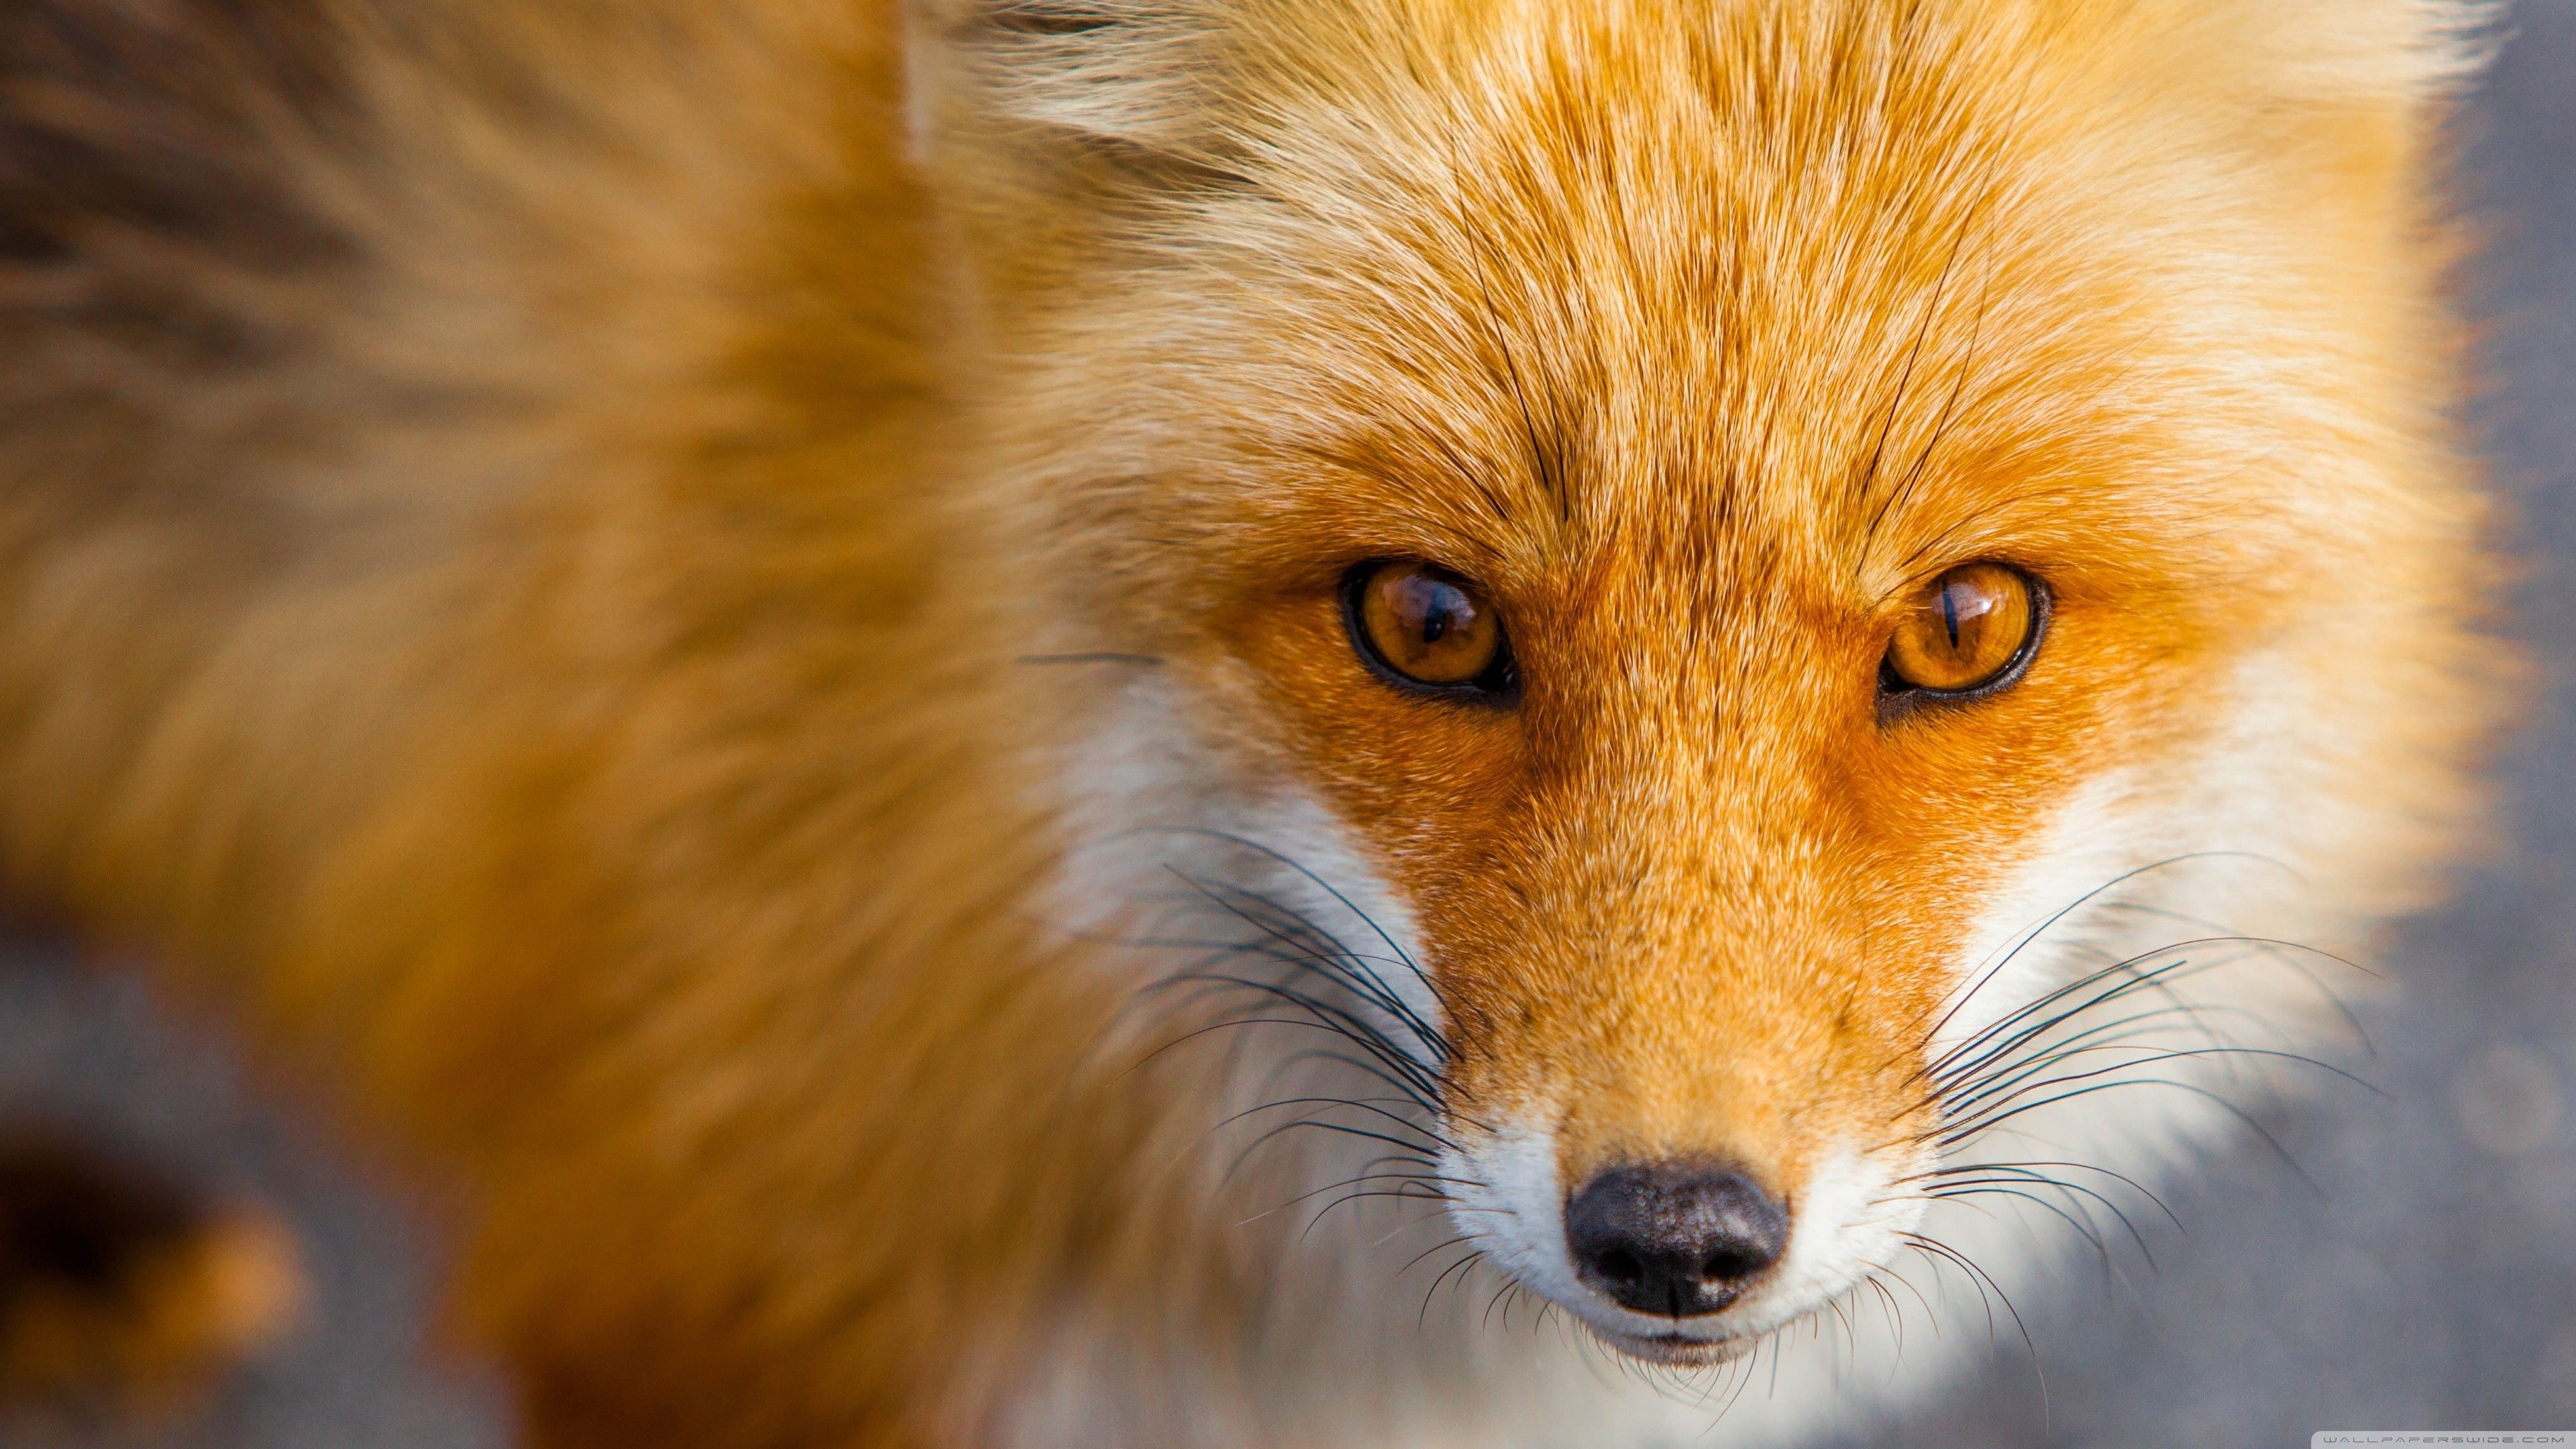 Red Fox Wallpaper Free Red Fox Background